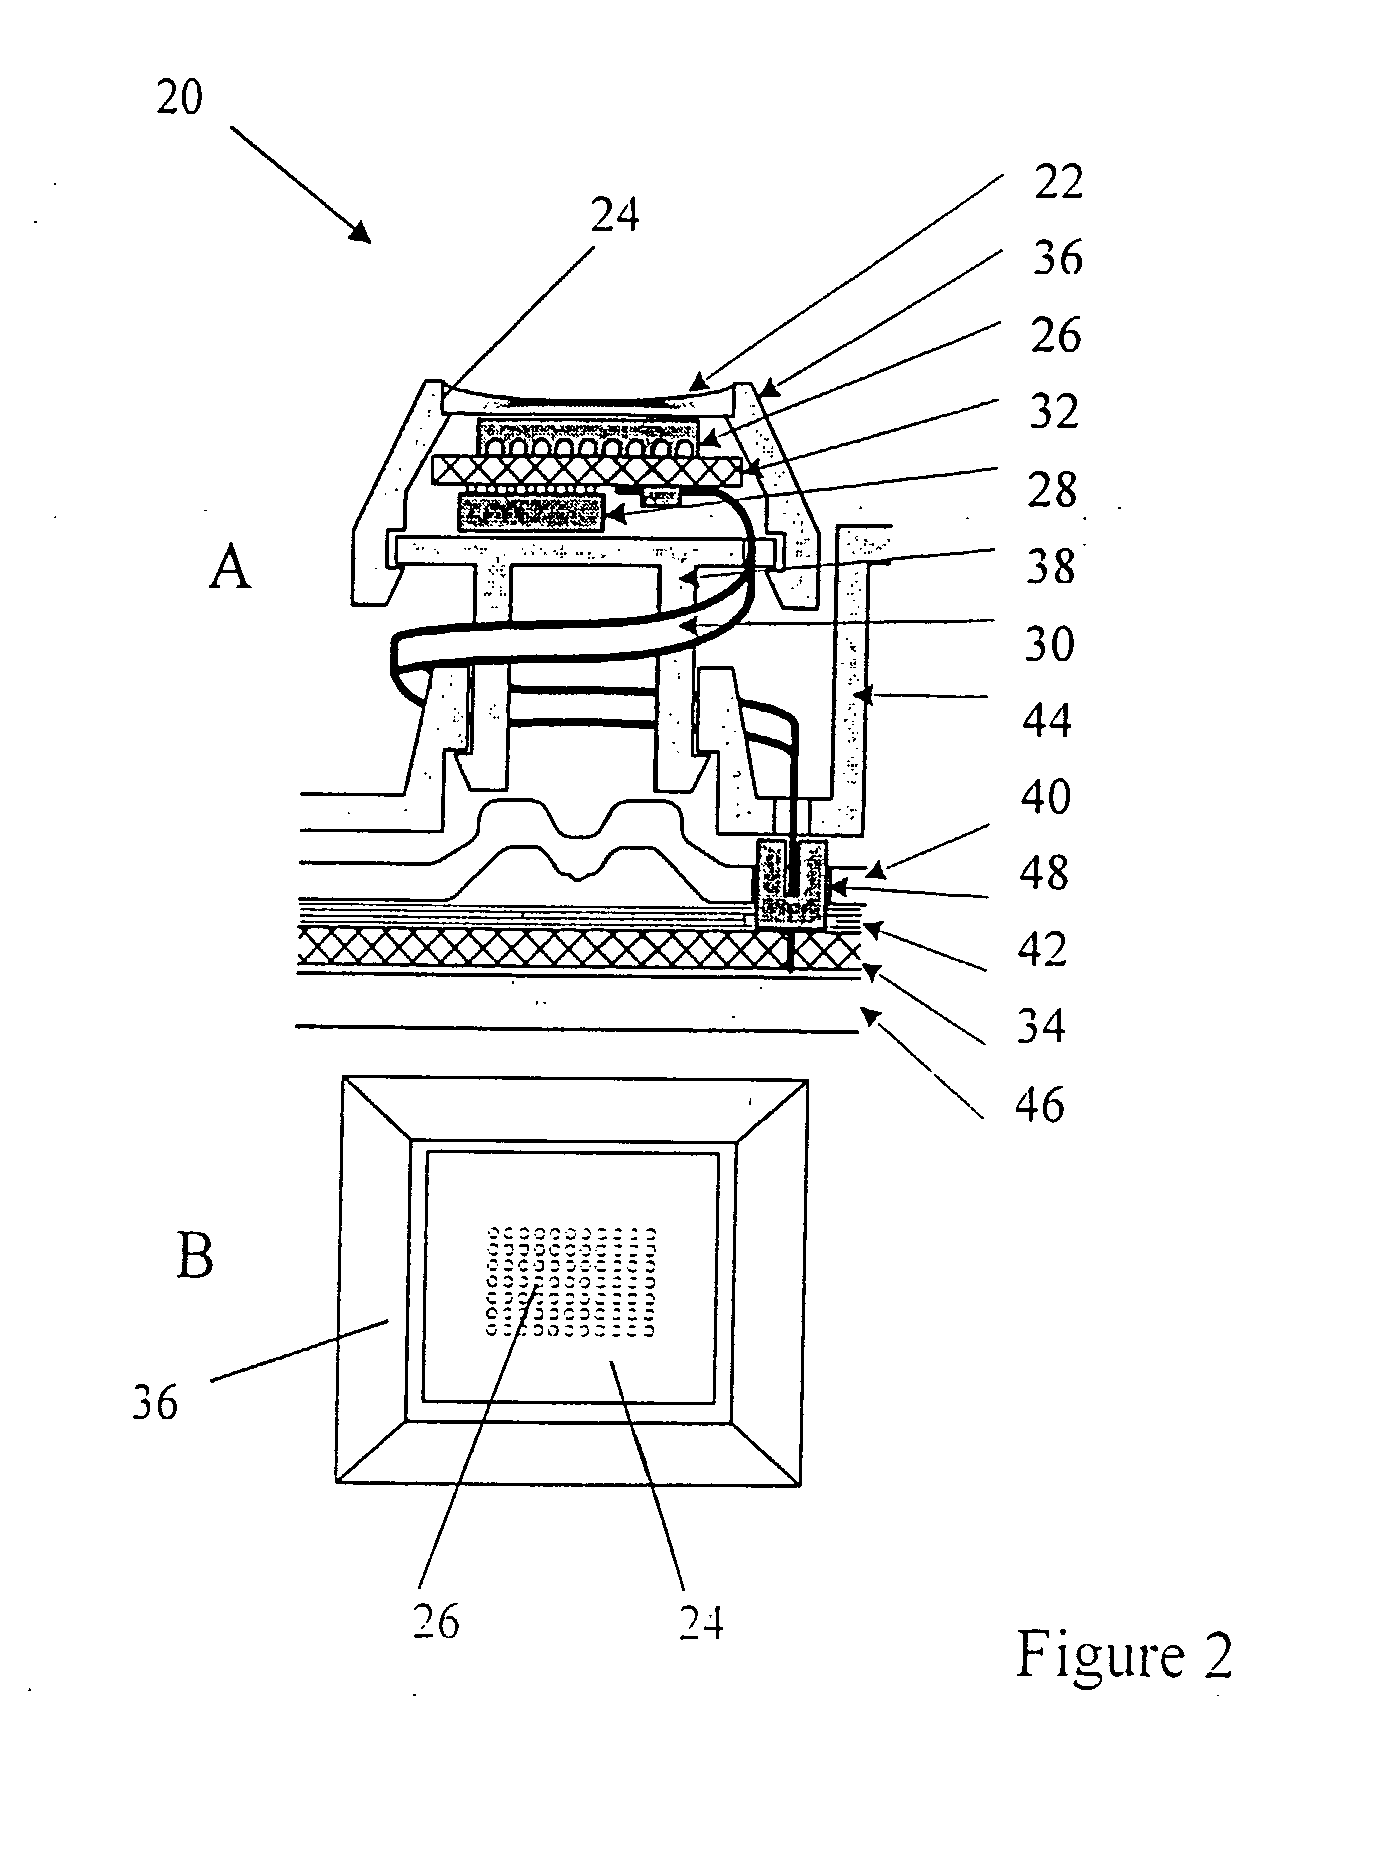 Universal Multifunctional Key for Input/Output Devices